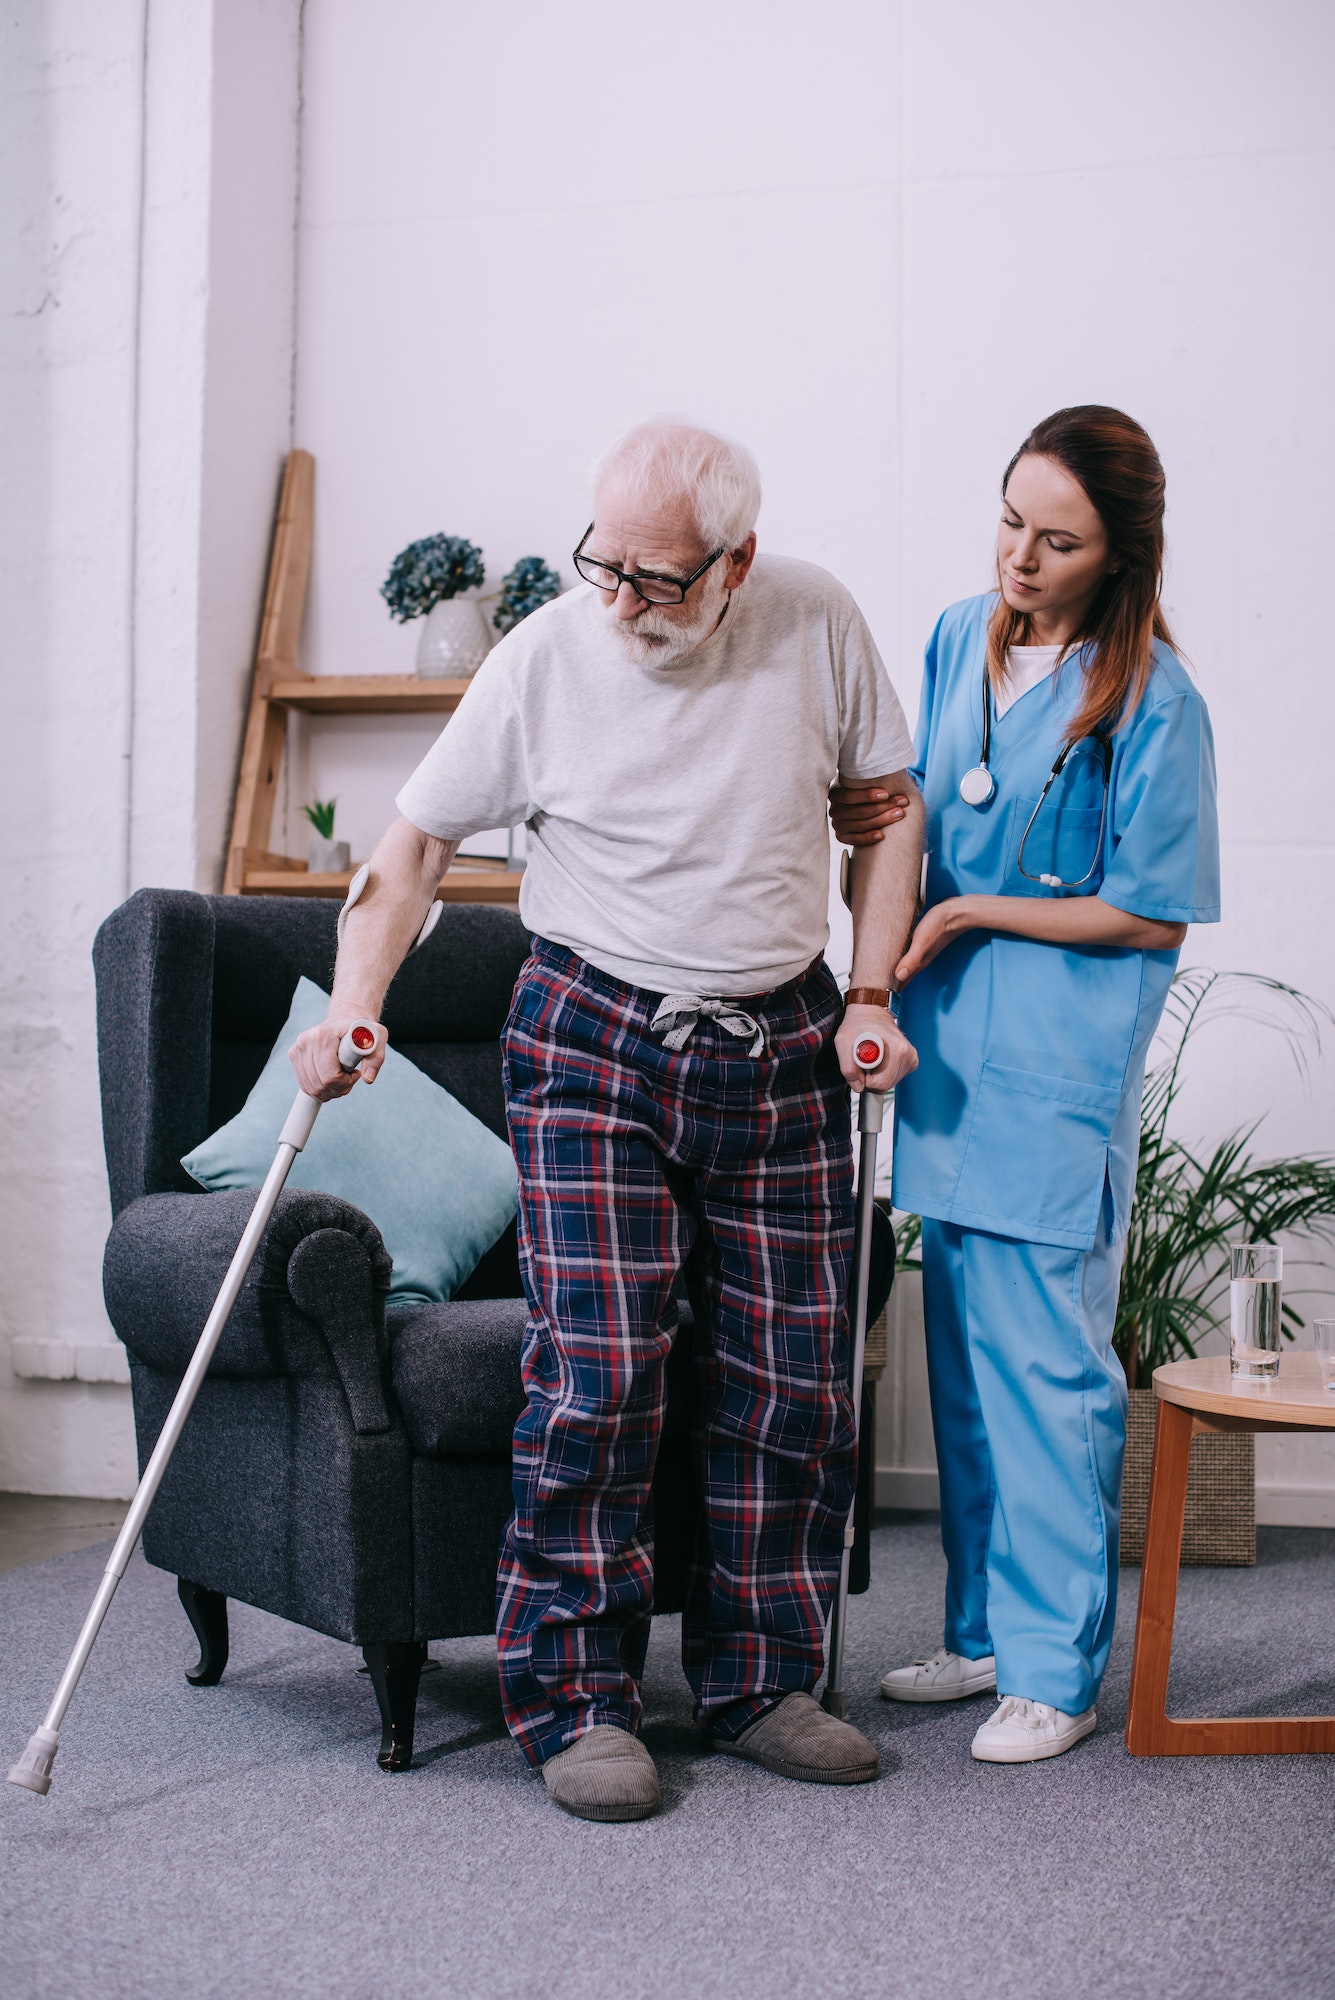 Nurse supporting male patient with crutches